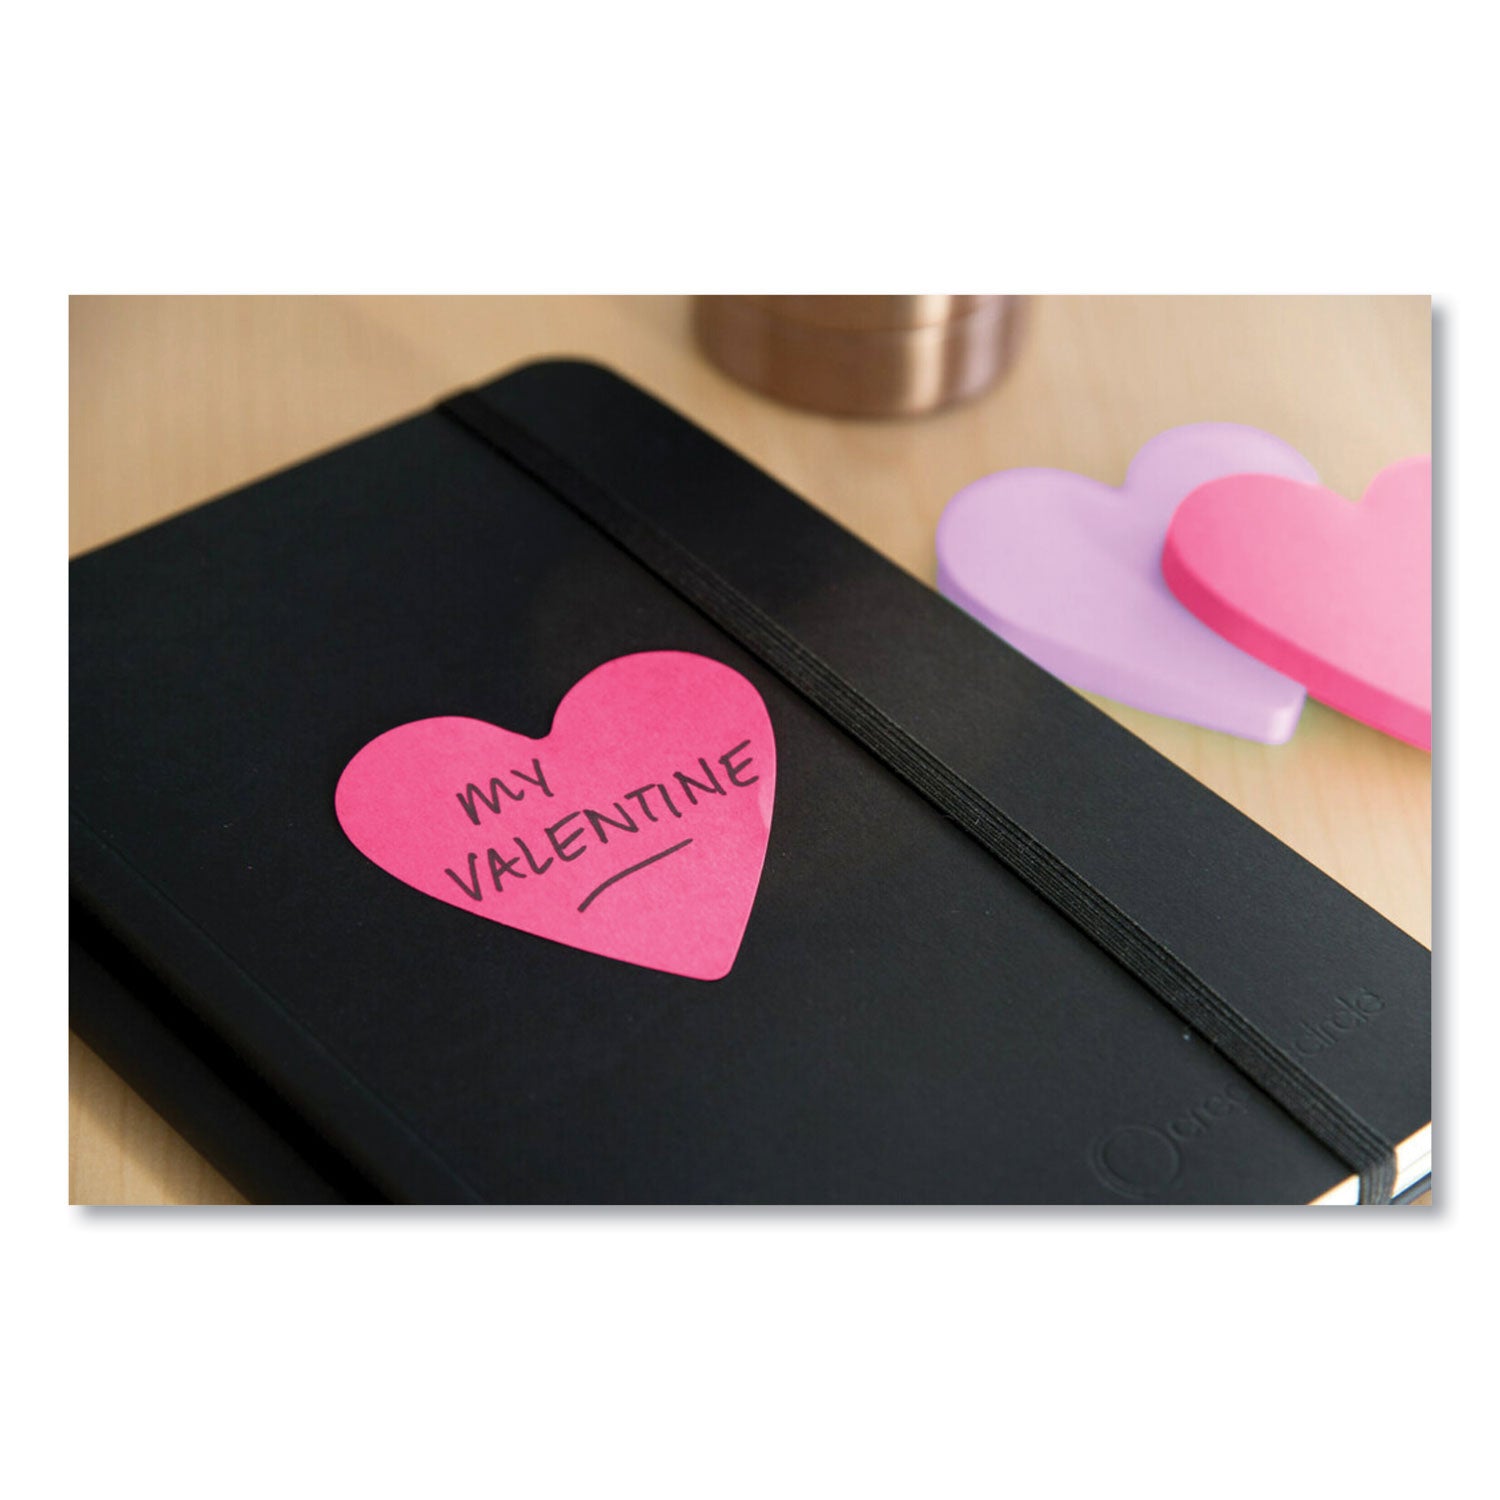 die-cut-heart-shaped-notepads-3-x-3-pink-purple-75-sheets-pad-2-pads-pack_mmm7350hrt - 2